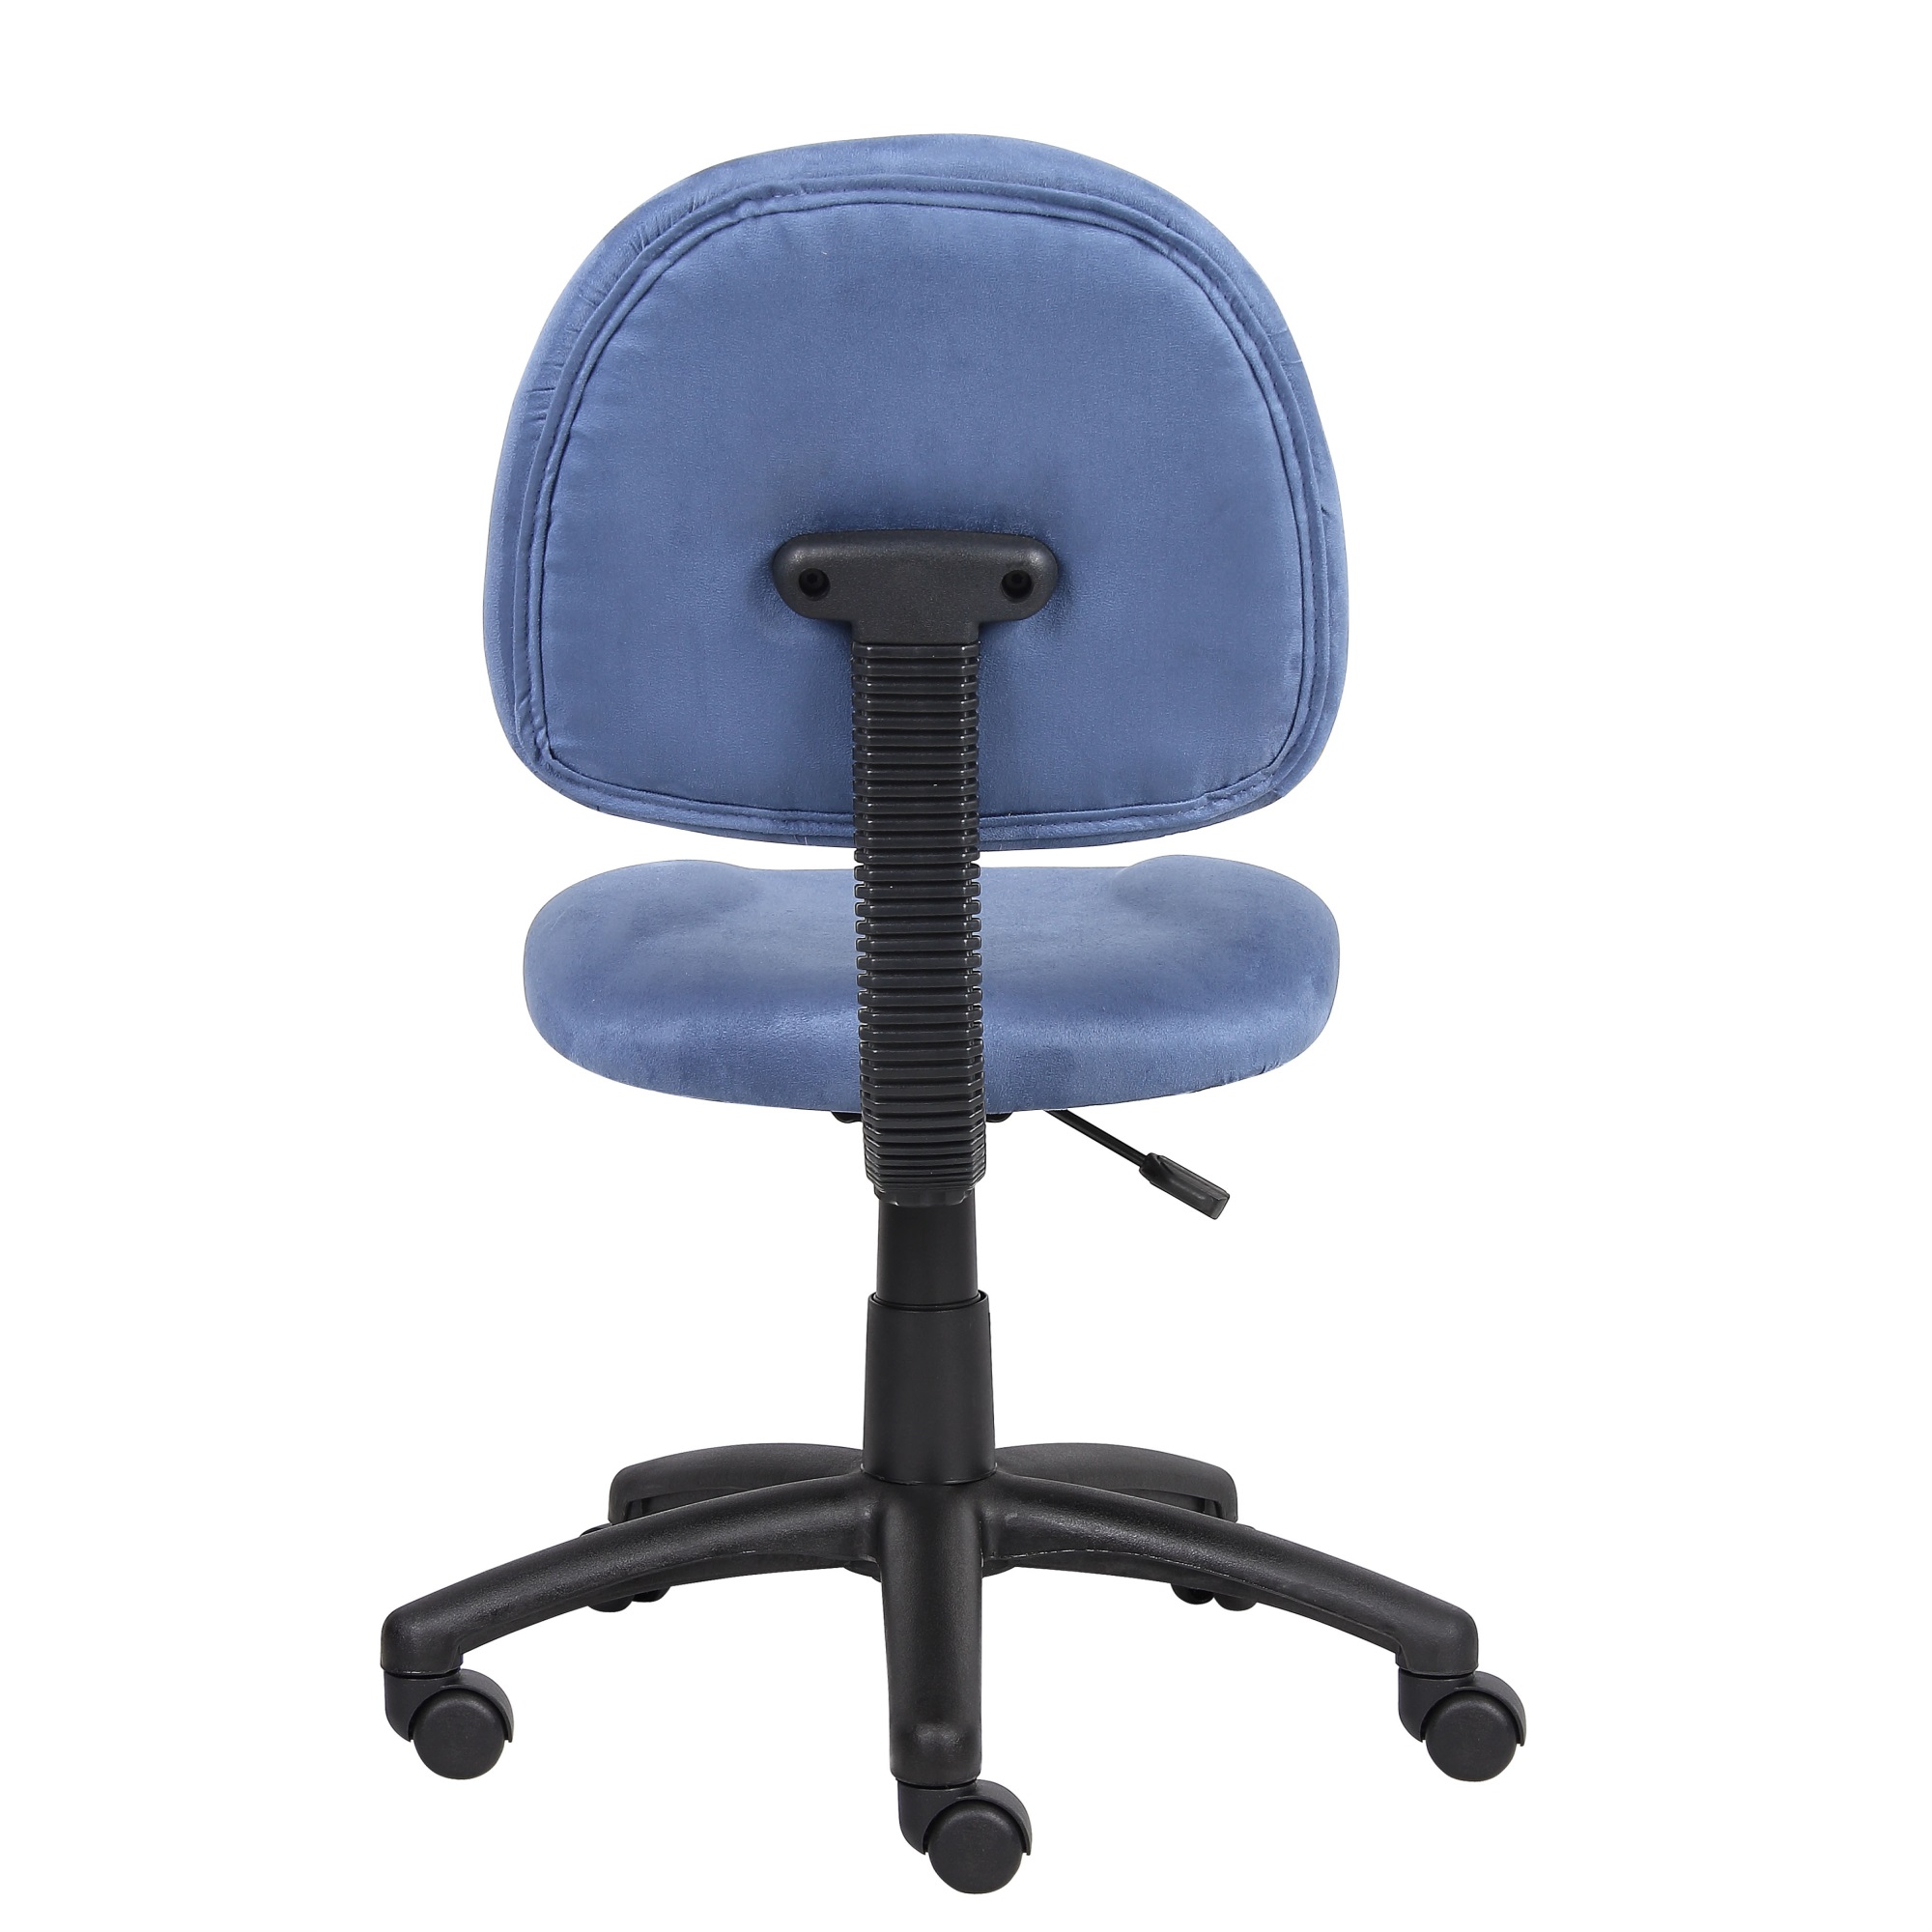 Boss Office Products B325-BE Perfect Posture Deluxe Modern Home Office Chair without Arms, Blue - image 2 of 6